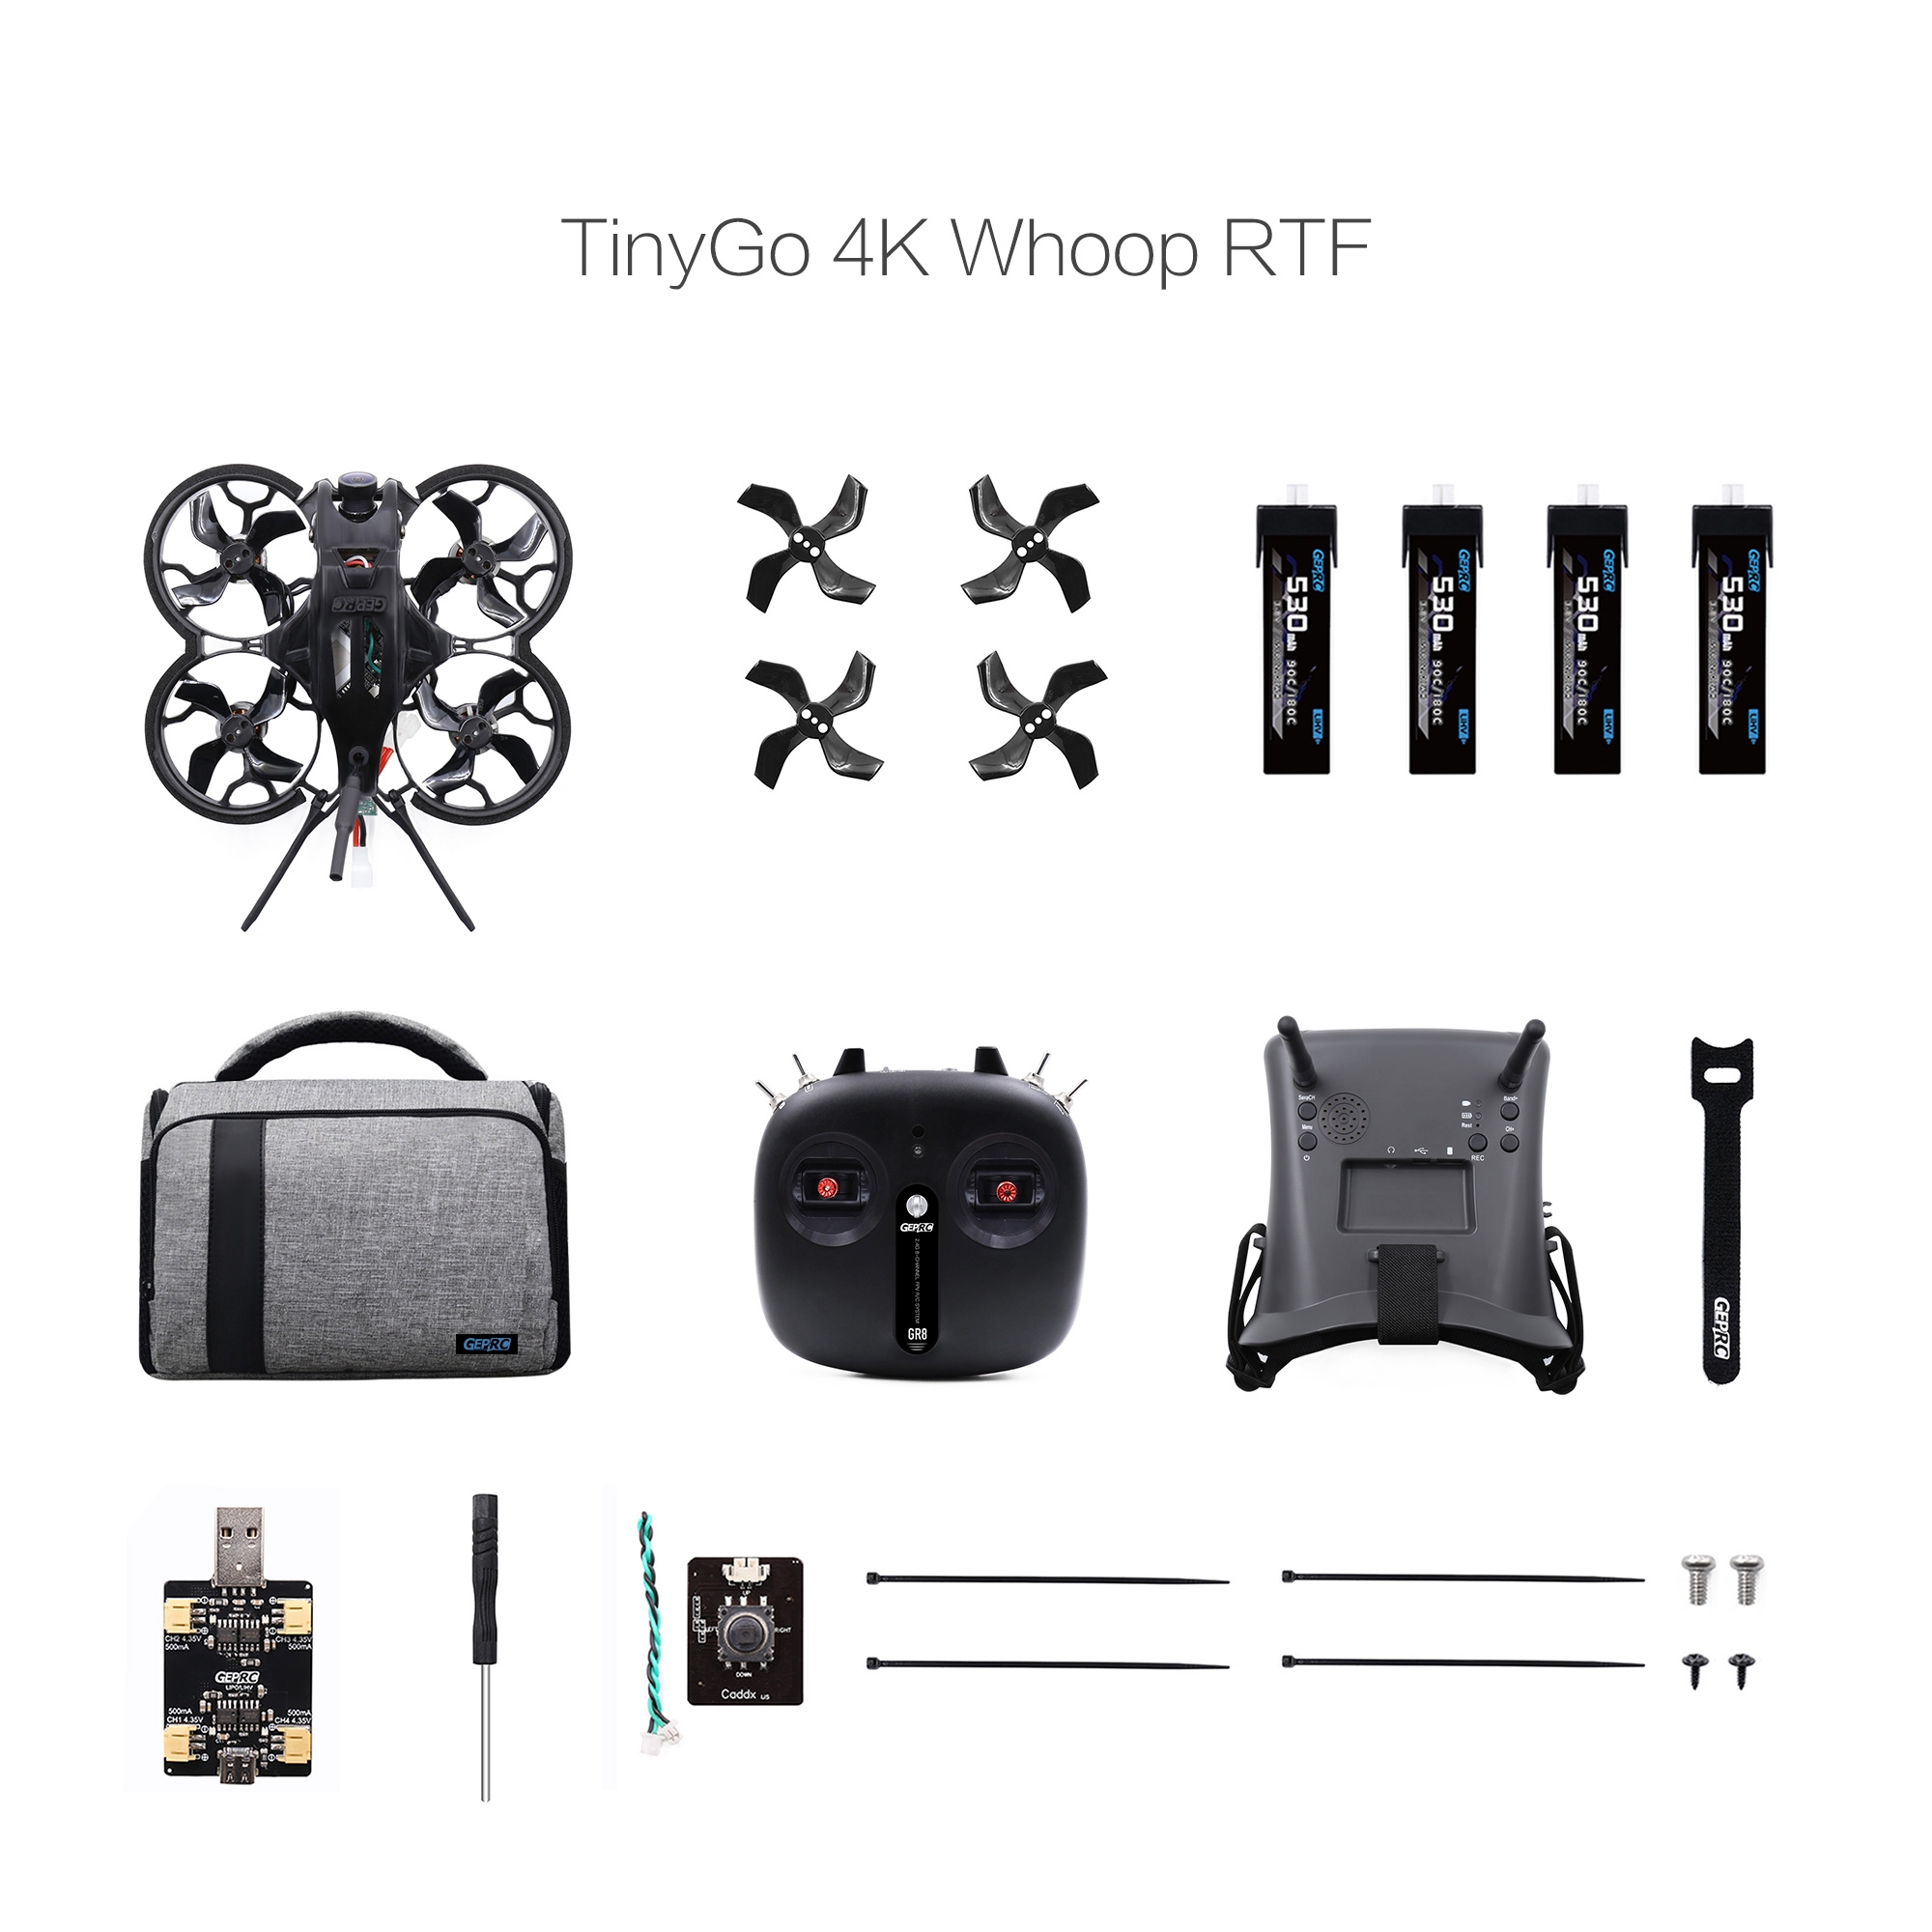 $251.99 for GEPRC TinyGO 1.6inch 2S 4K Caddx Loris FPV Indoor Whoop+GR8 Remote Controller+RG1 Goggles RTF Ready To Fly FPV Racing RC Drone